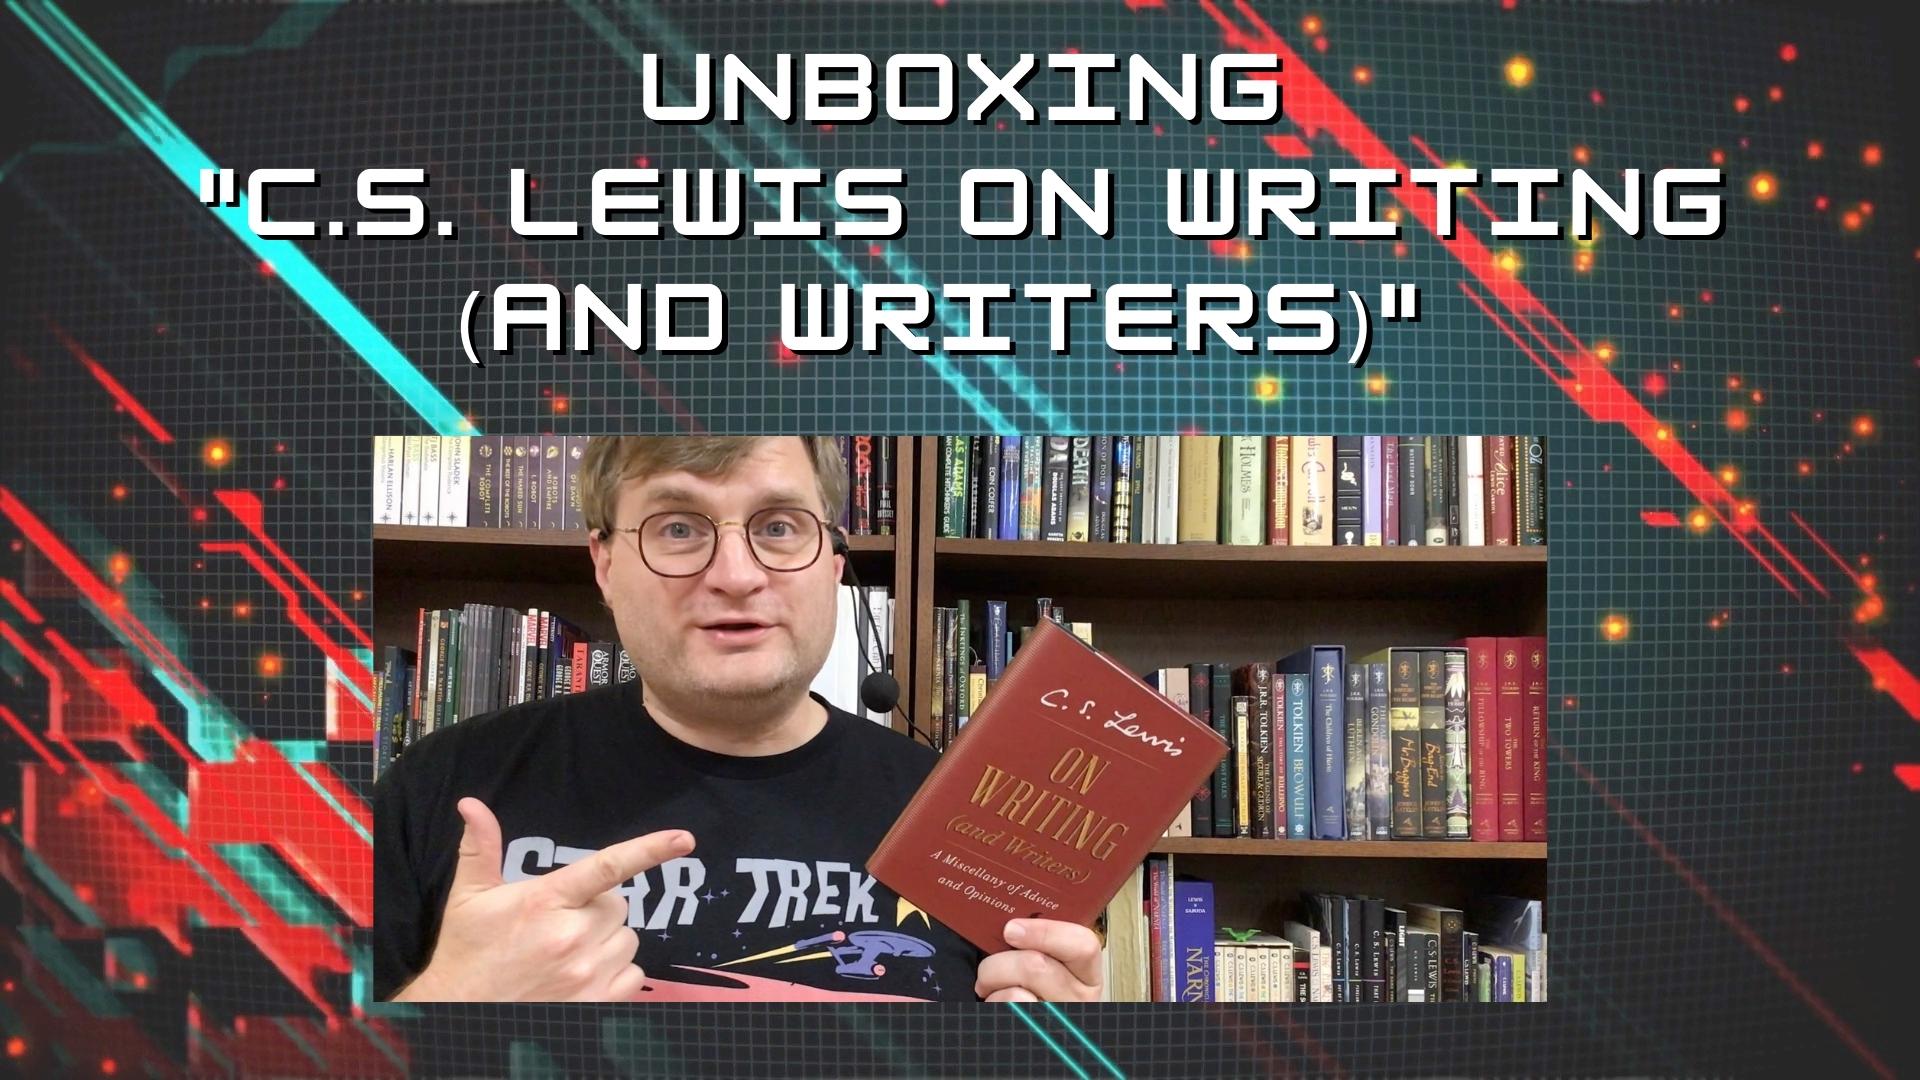 Unboxing C.S. LEWIS ON WRITING (AND WRITERS)